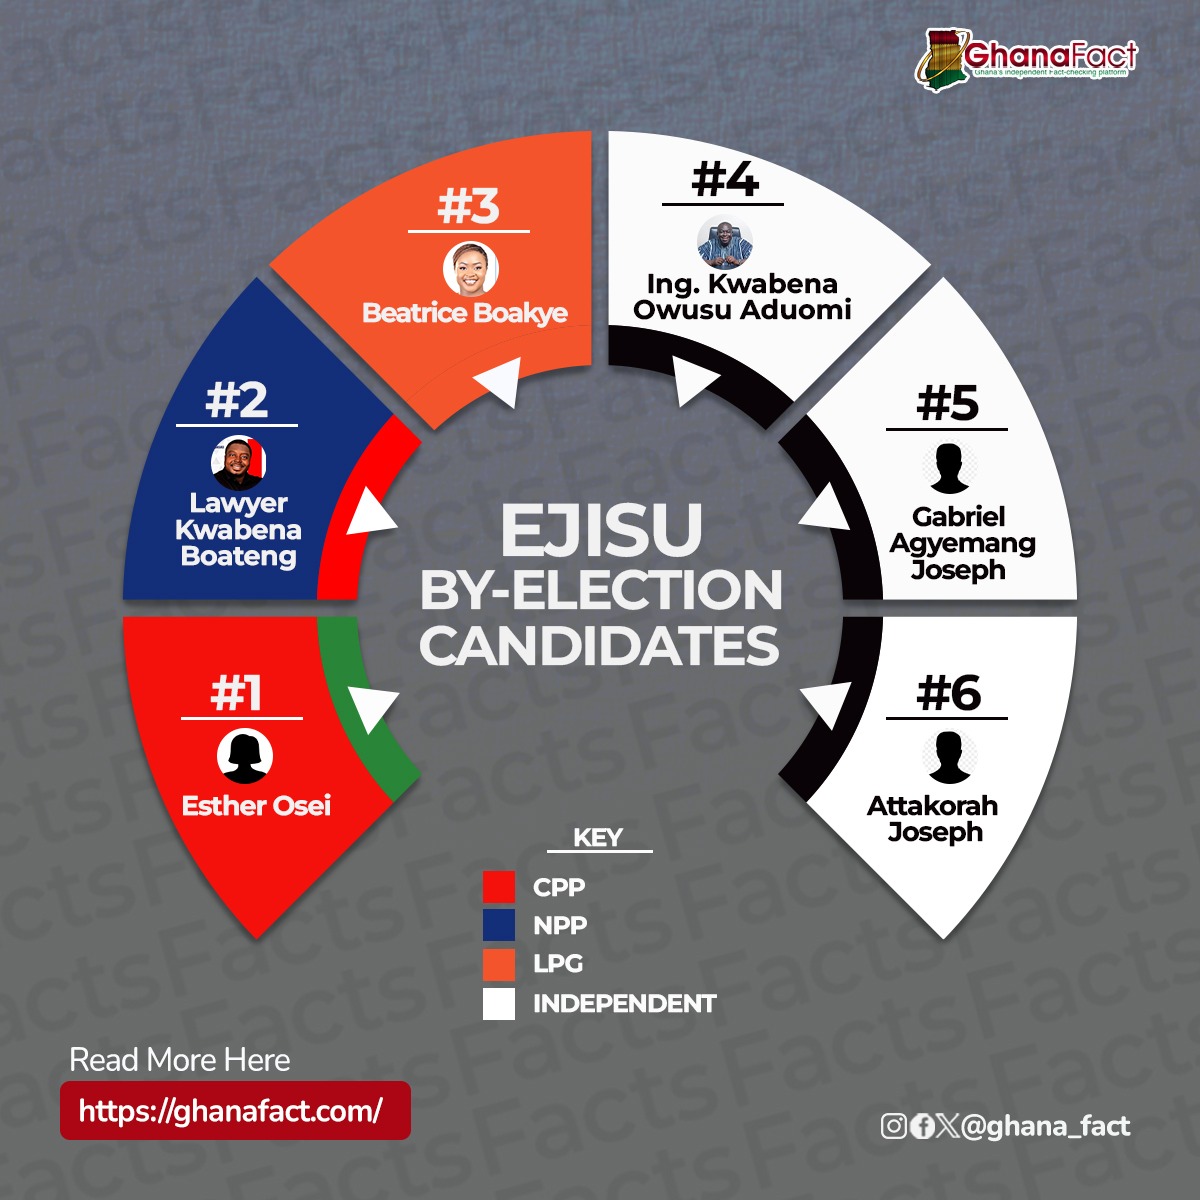 Six candidates are contesting in the Ejisu by-election, in the Ashanti Region. If you're in doubt of claims on social media, verify with GhanaFact via our tipline 0244499971. #EjisuByElection #FactSpace